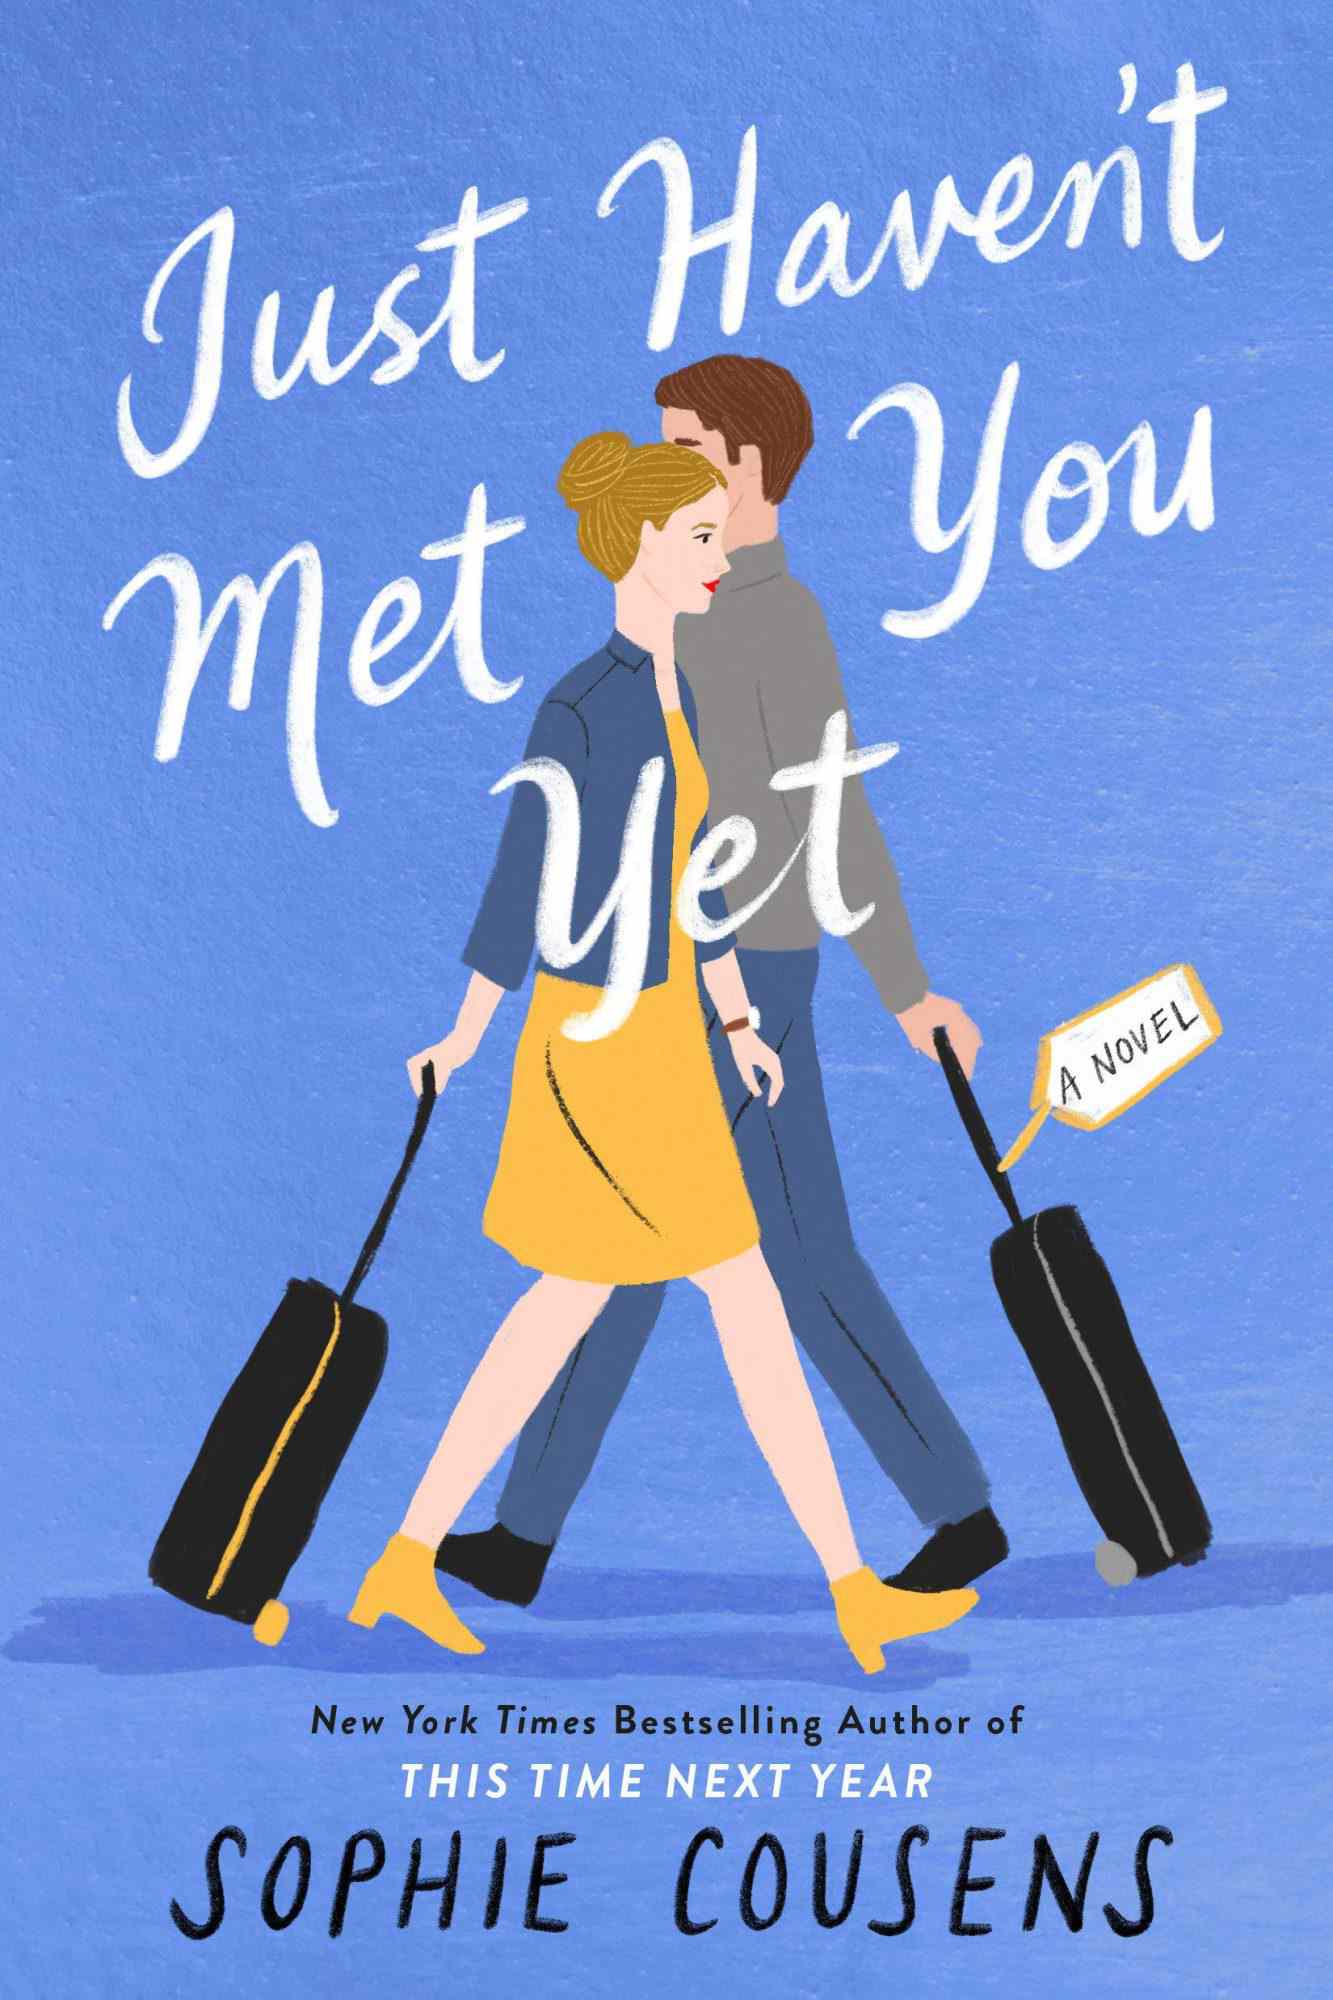 Book cover of Just Haven’t Met You Yet by Sophie Cousens